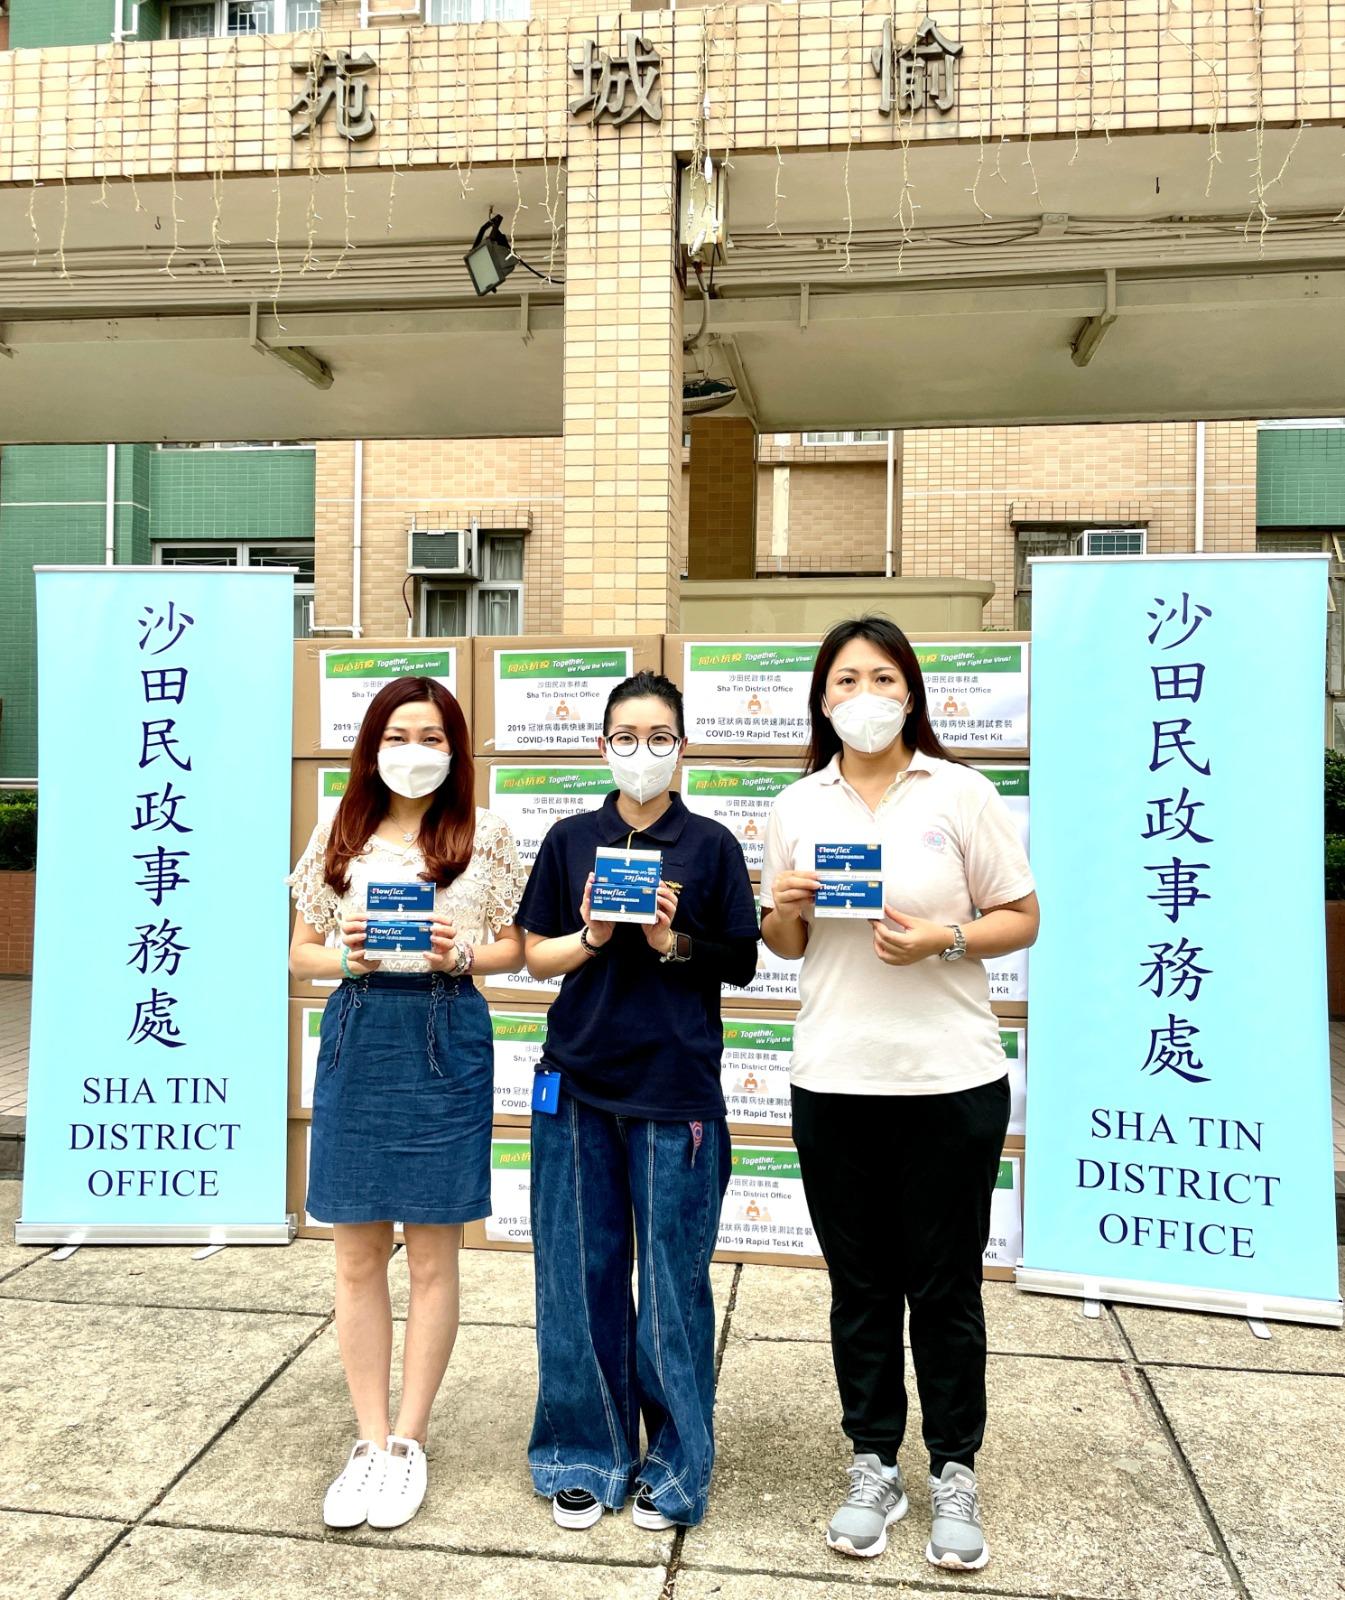 The Sha Tin District Office today (June 19) distributed COVID-19 rapid test kits to households, cleansing workers and property management staff living and working in Yue Shing Court for voluntary testing through the property management company and the owners' corporation.